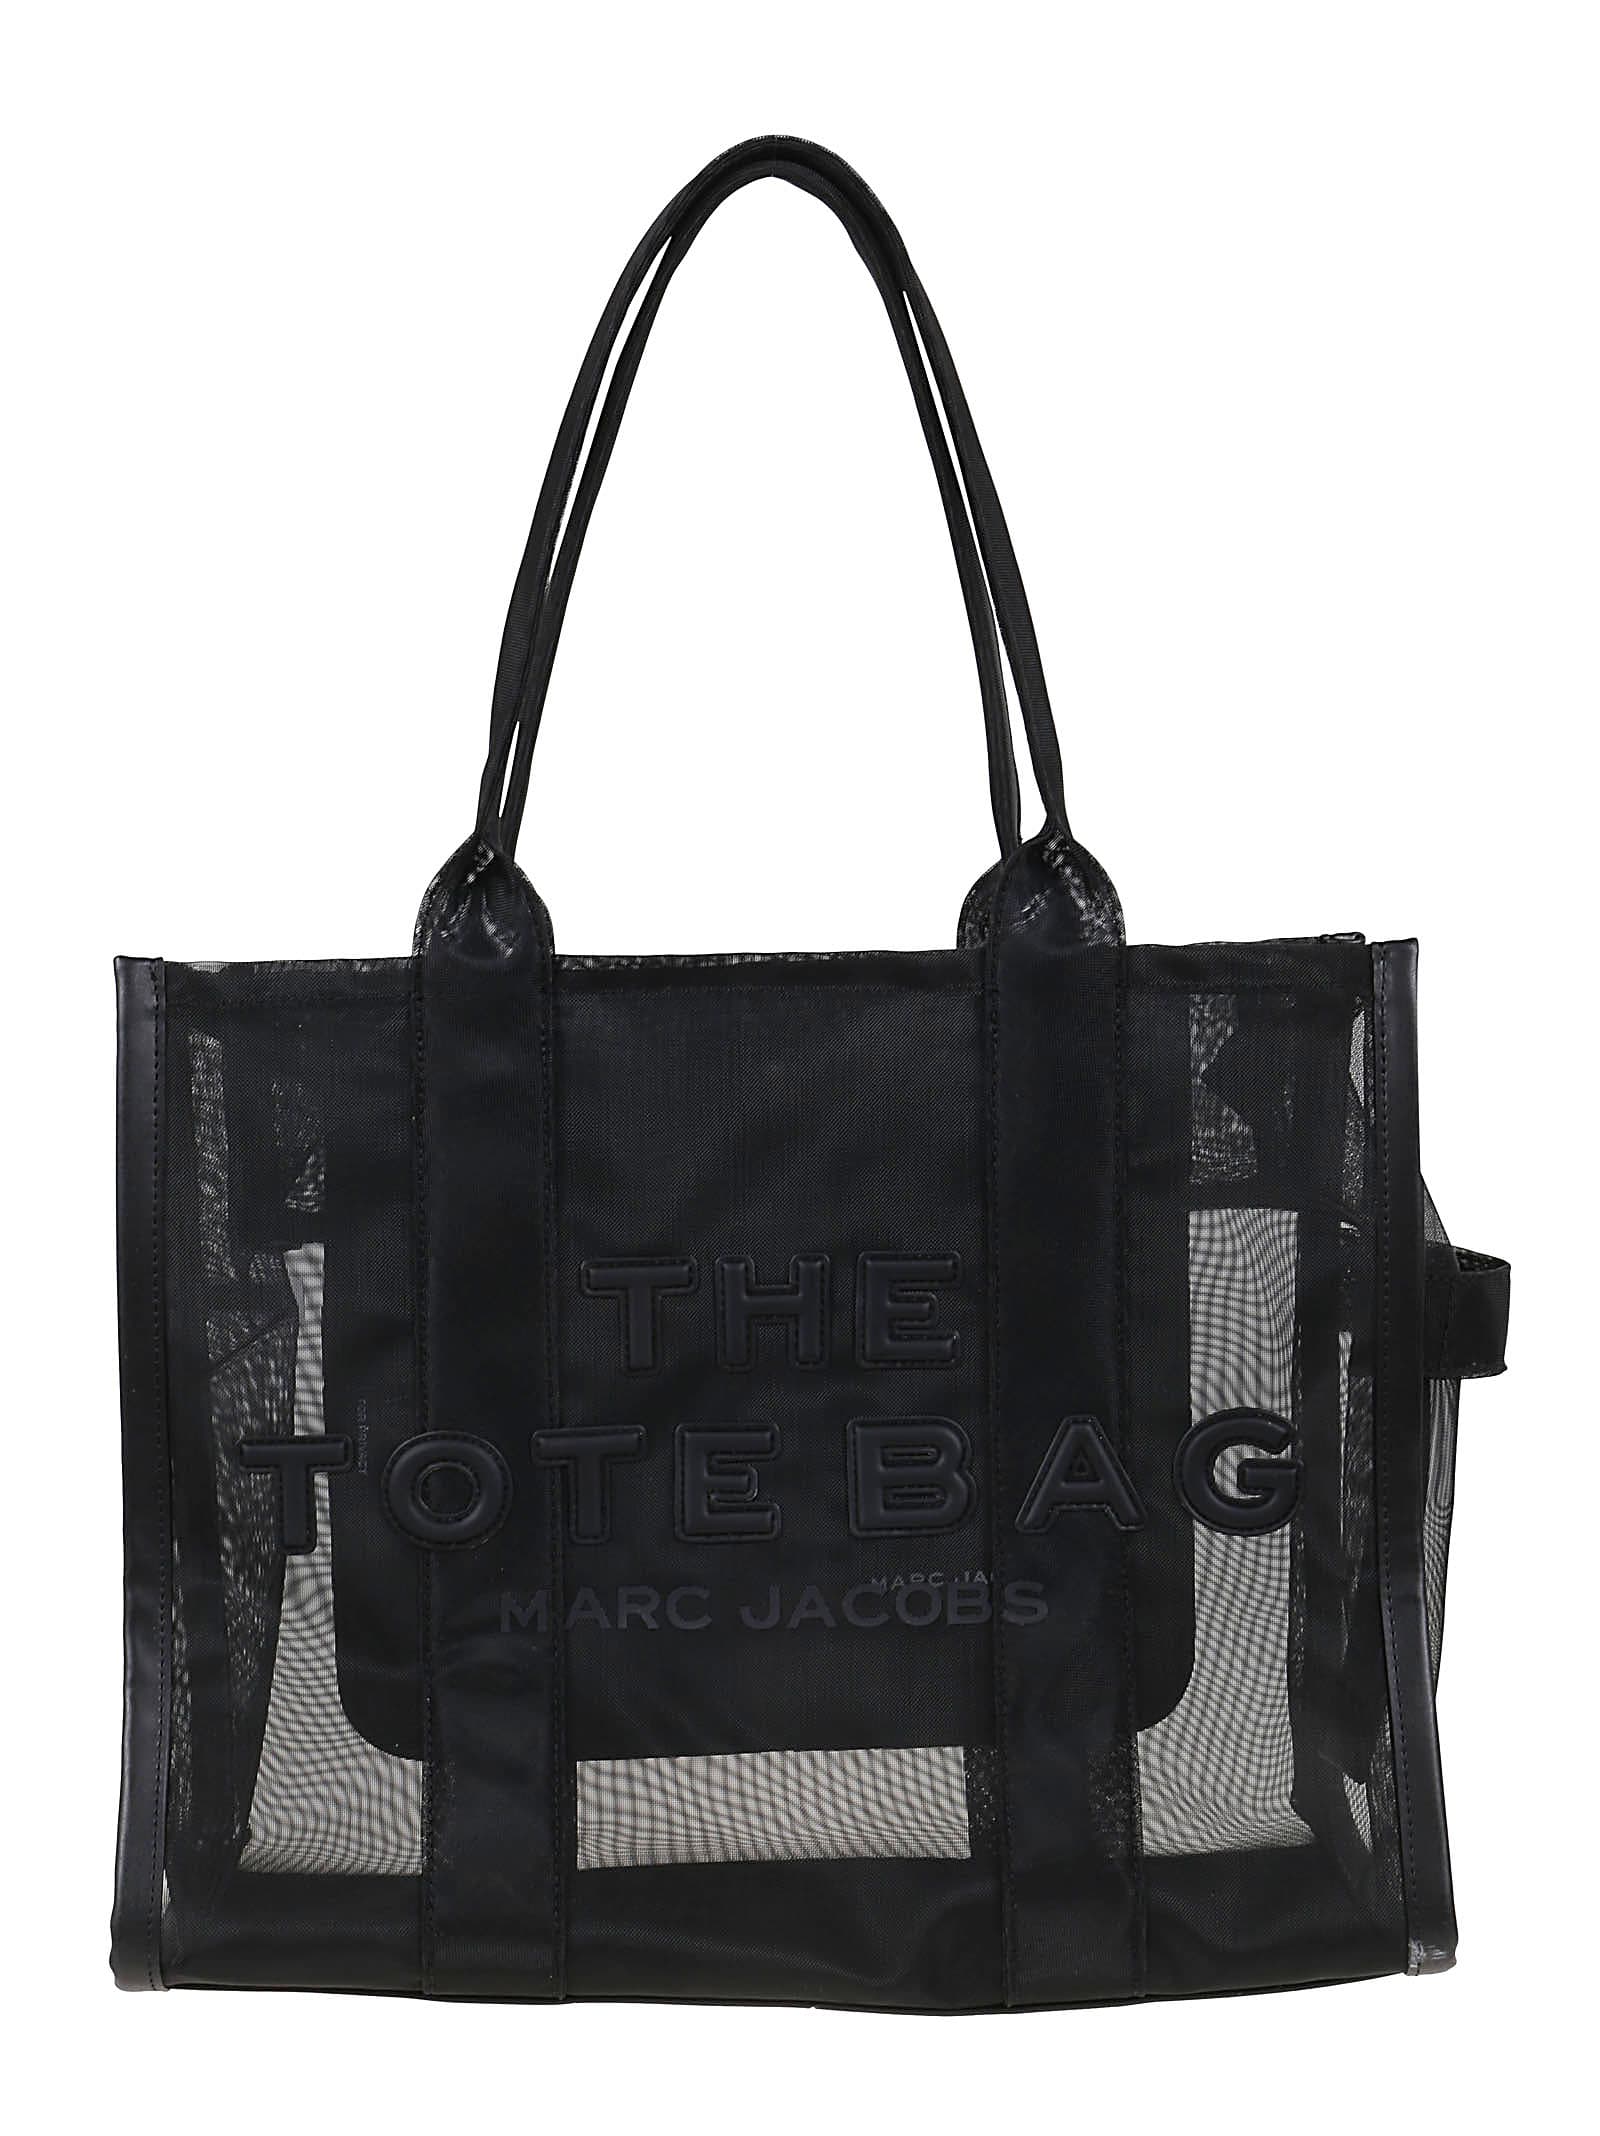 Marc Jacobs Traveler Tote